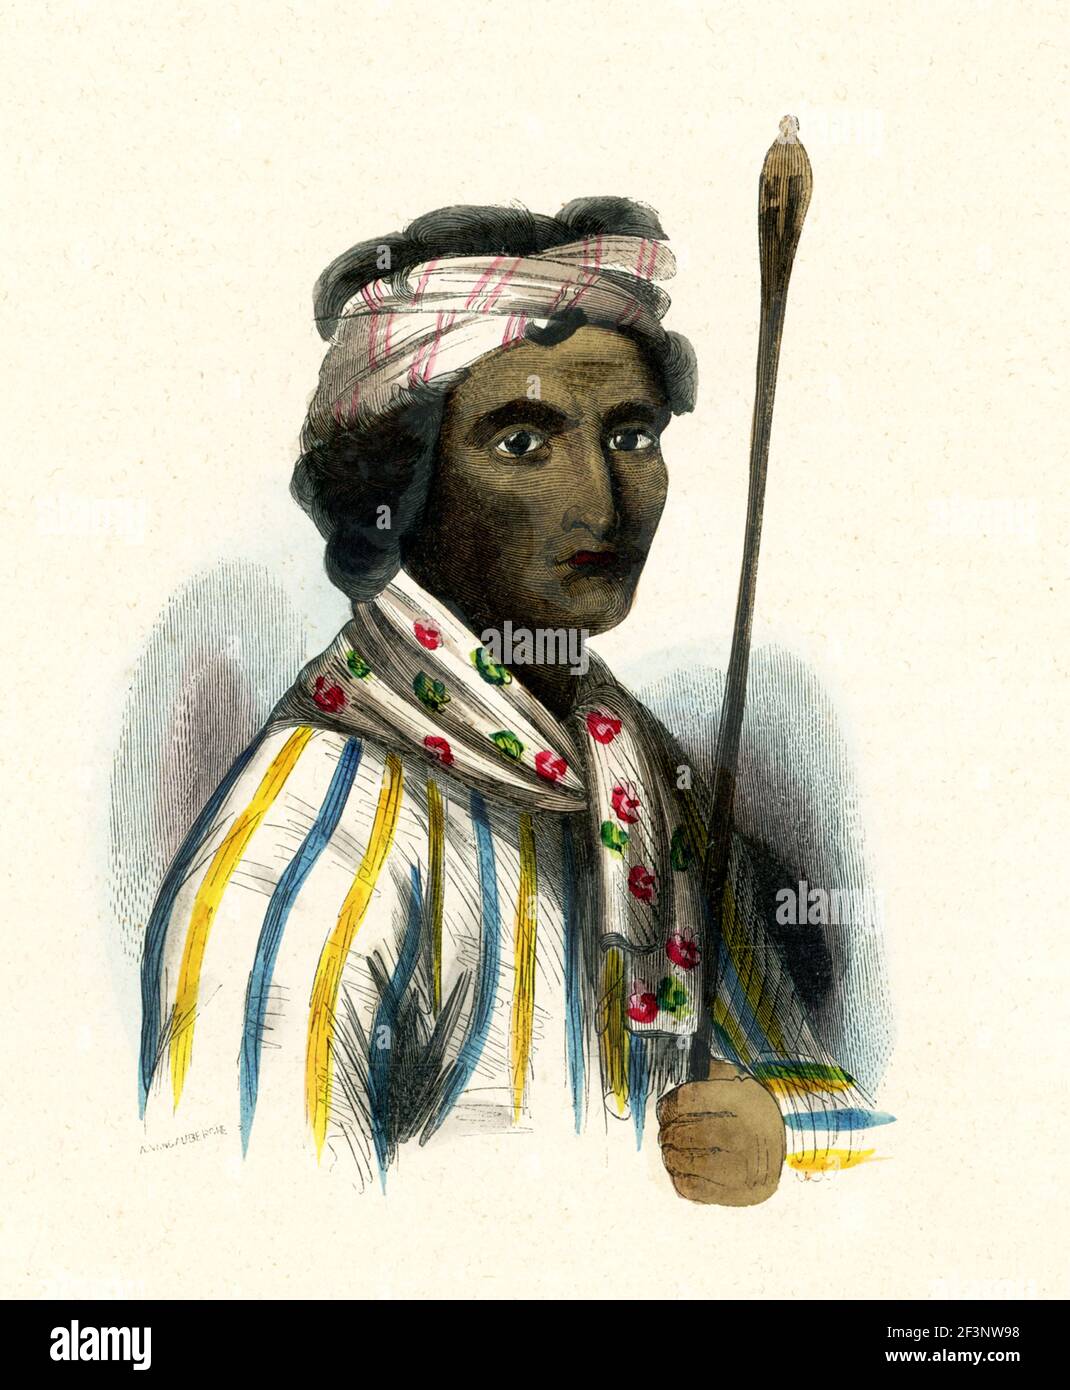 This 1840s illustration shows a rajah from Dao. Dao refers to a people in West New Guinea in Indonesia. Indonesia, officially the Republic of Indonesia, is a country in Southeast Asia and Oceania, between the Indian and Pacific oceans. It consists of more than seventeen thousand islands, including Sumatra, Java, Sulawesi, and parts of Borneo and New Guinea. Western New Guinea, also known as Papua, is the Indonesian part of the island of New Guinea. Since the island is alternatively named as Papua, the region is also called West Papua. Lying to the west of the independent state of Papua New Gui Stock Photo